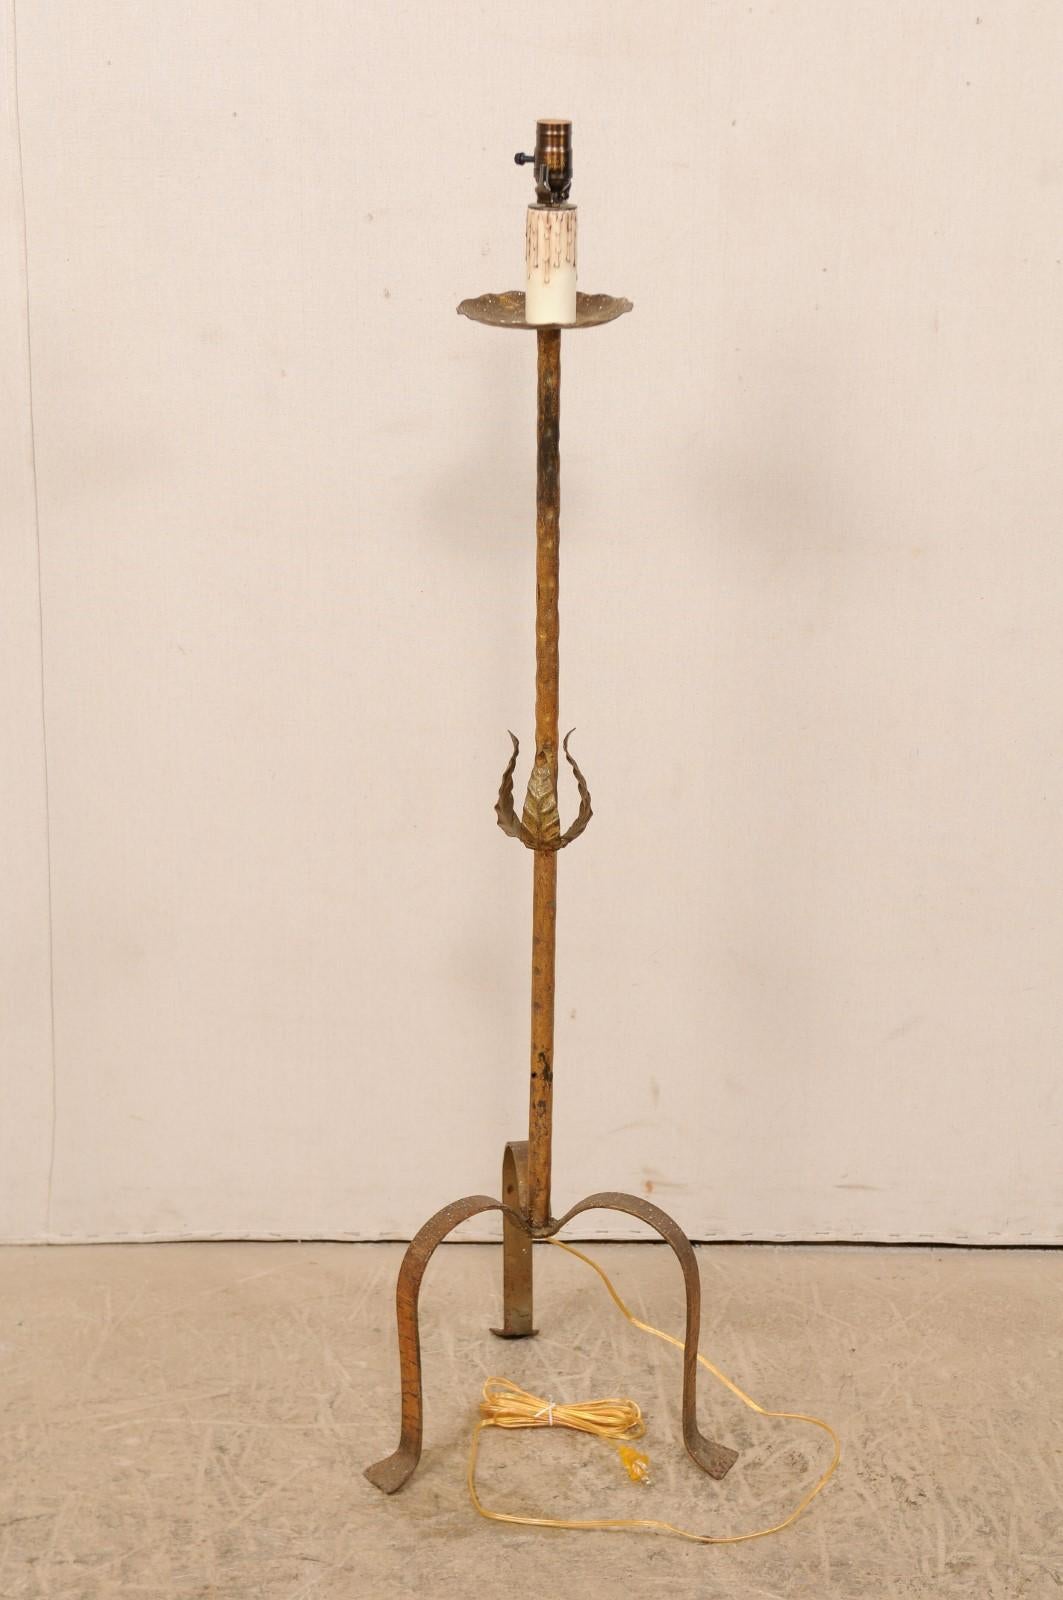 A French gold toned iron floor lamp from the mid-20th century. This vintage single-light floor lamp from France features it's original gold color over iron body, having a slender central post minimally adorn with three metal leaves wrapped loosely